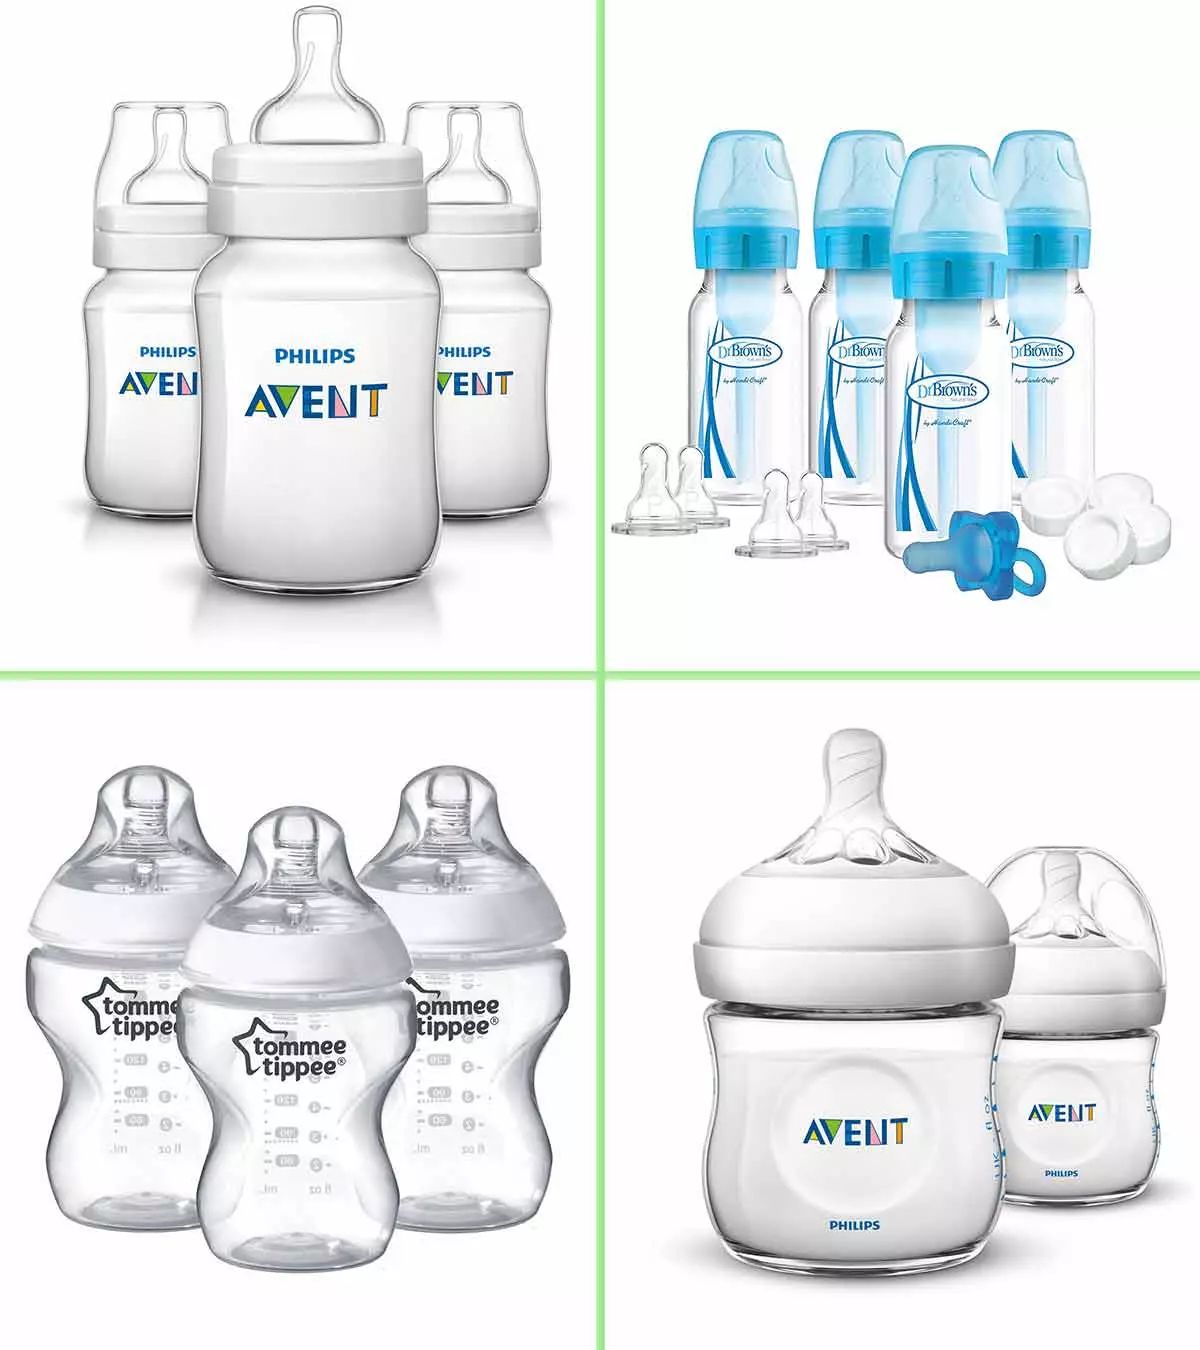 Reduce gassy stomach and colic in babies with these bottles.